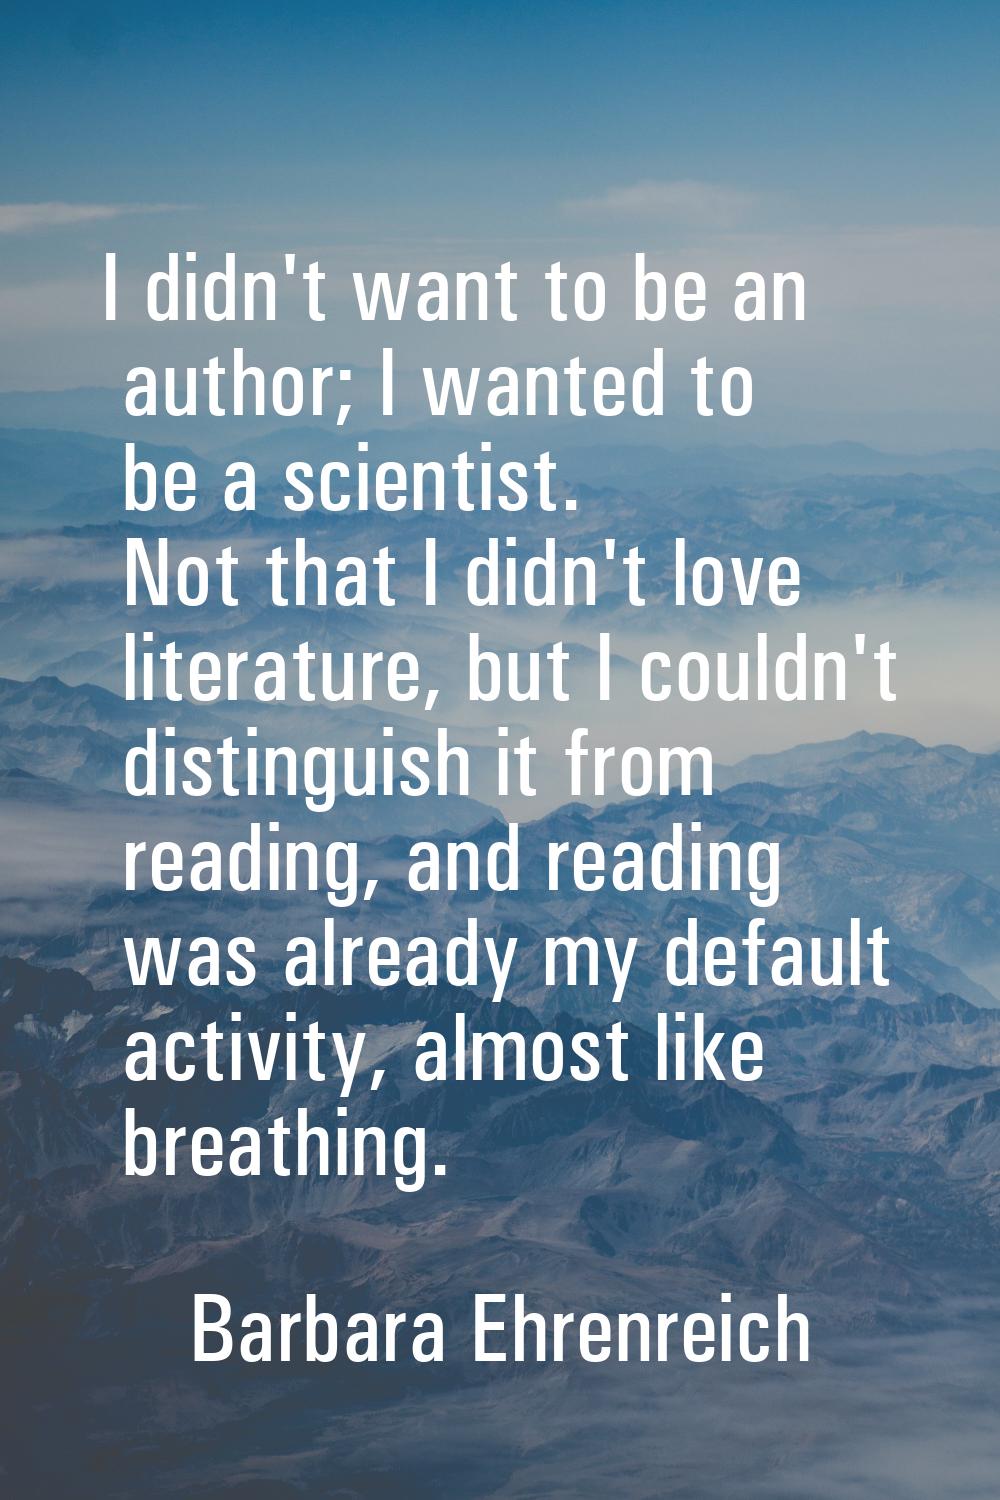 I didn't want to be an author; I wanted to be a scientist. Not that I didn't love literature, but I